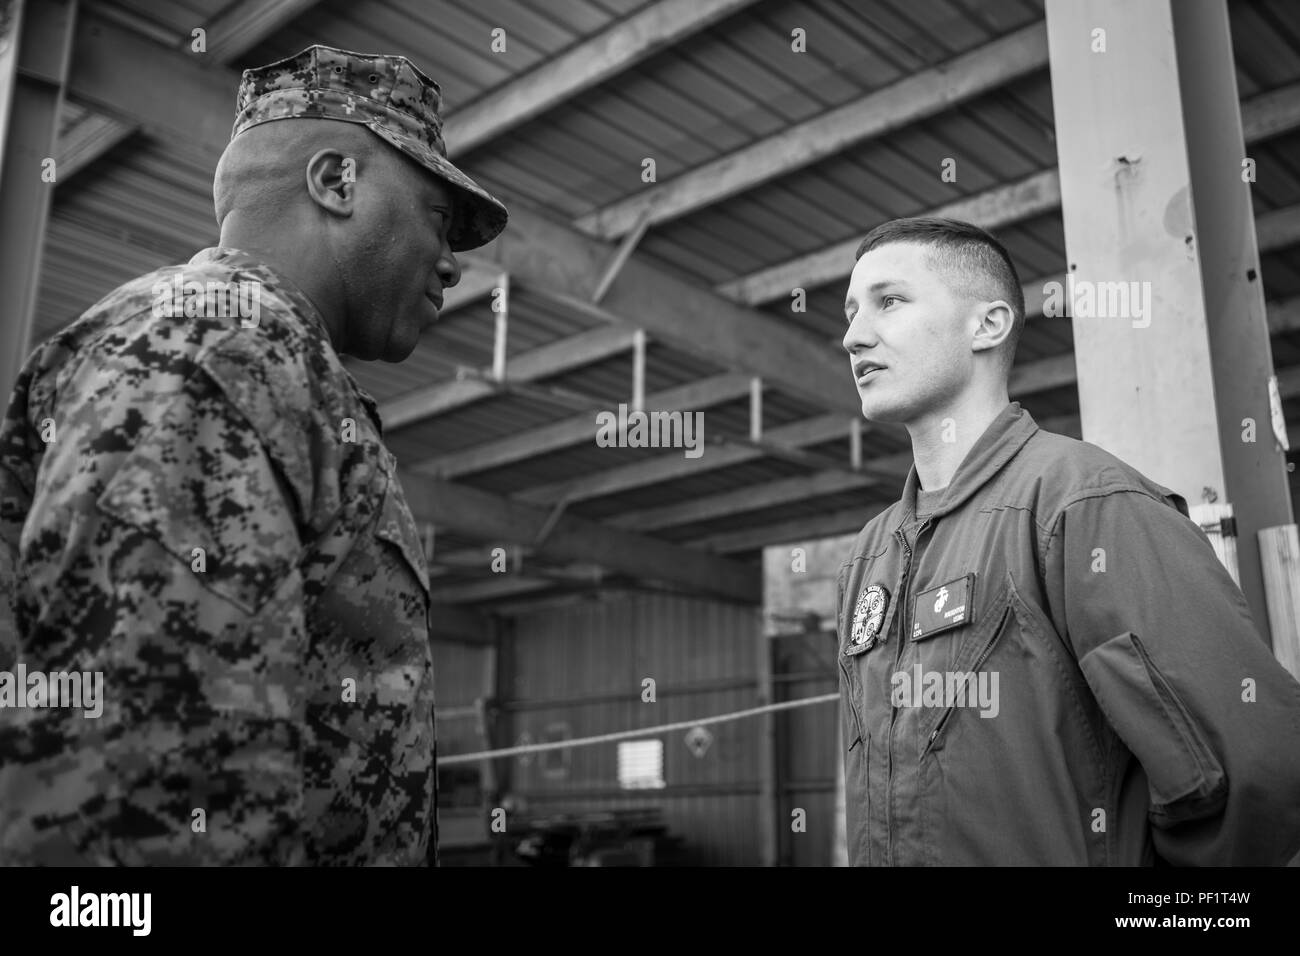 The 18th Sergeant Major of the Marine Corps, Ronald L. Green, visits Marines assigned to Chemical Biological Incident Response Force (CBIRF) aboard Naval Support Facility Indian Head, Md,. Feb. 18, 2016. The mission of CBIRF is to respond to a chemical, biological, radiological, nuclear or high-yield explosive threat or event in order to assist local, state, or federal agencies and the geographical combatant commanders.  (U.S. Marine Corps photo by Sgt. Melissa Marnell, Office of the Sergeant Major of the Marine Corps/Released) Stock Photo